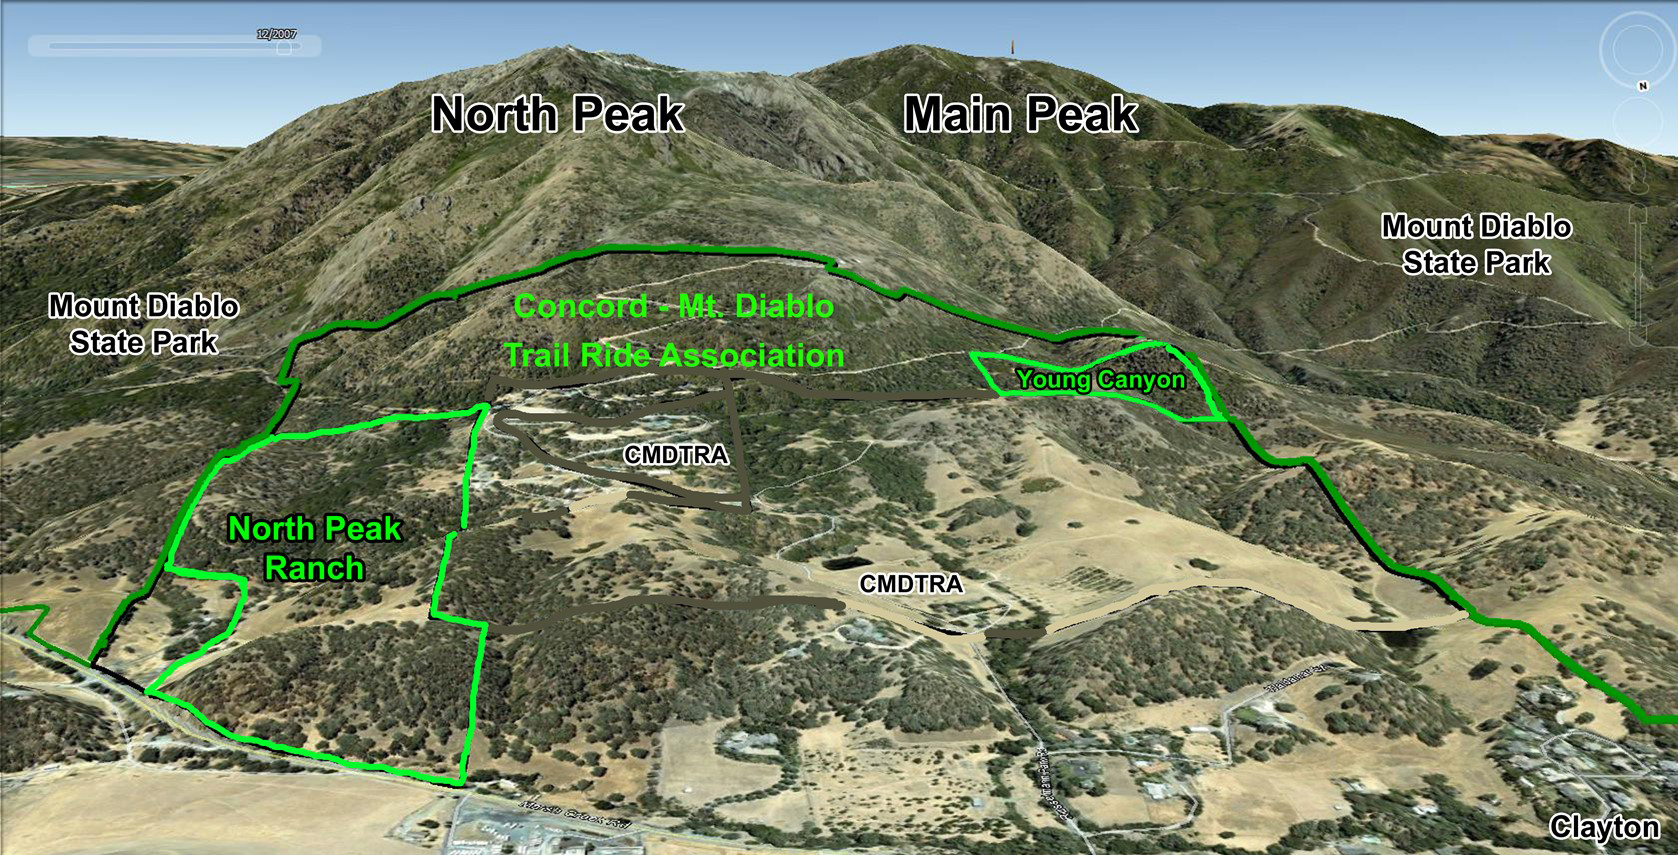 The Concord Mt. Diablo Trail Ride Association conservation easement land, which is surrounded by Mount Diablo State Park on three sides and other lands being protected by Save Mount Diablo.